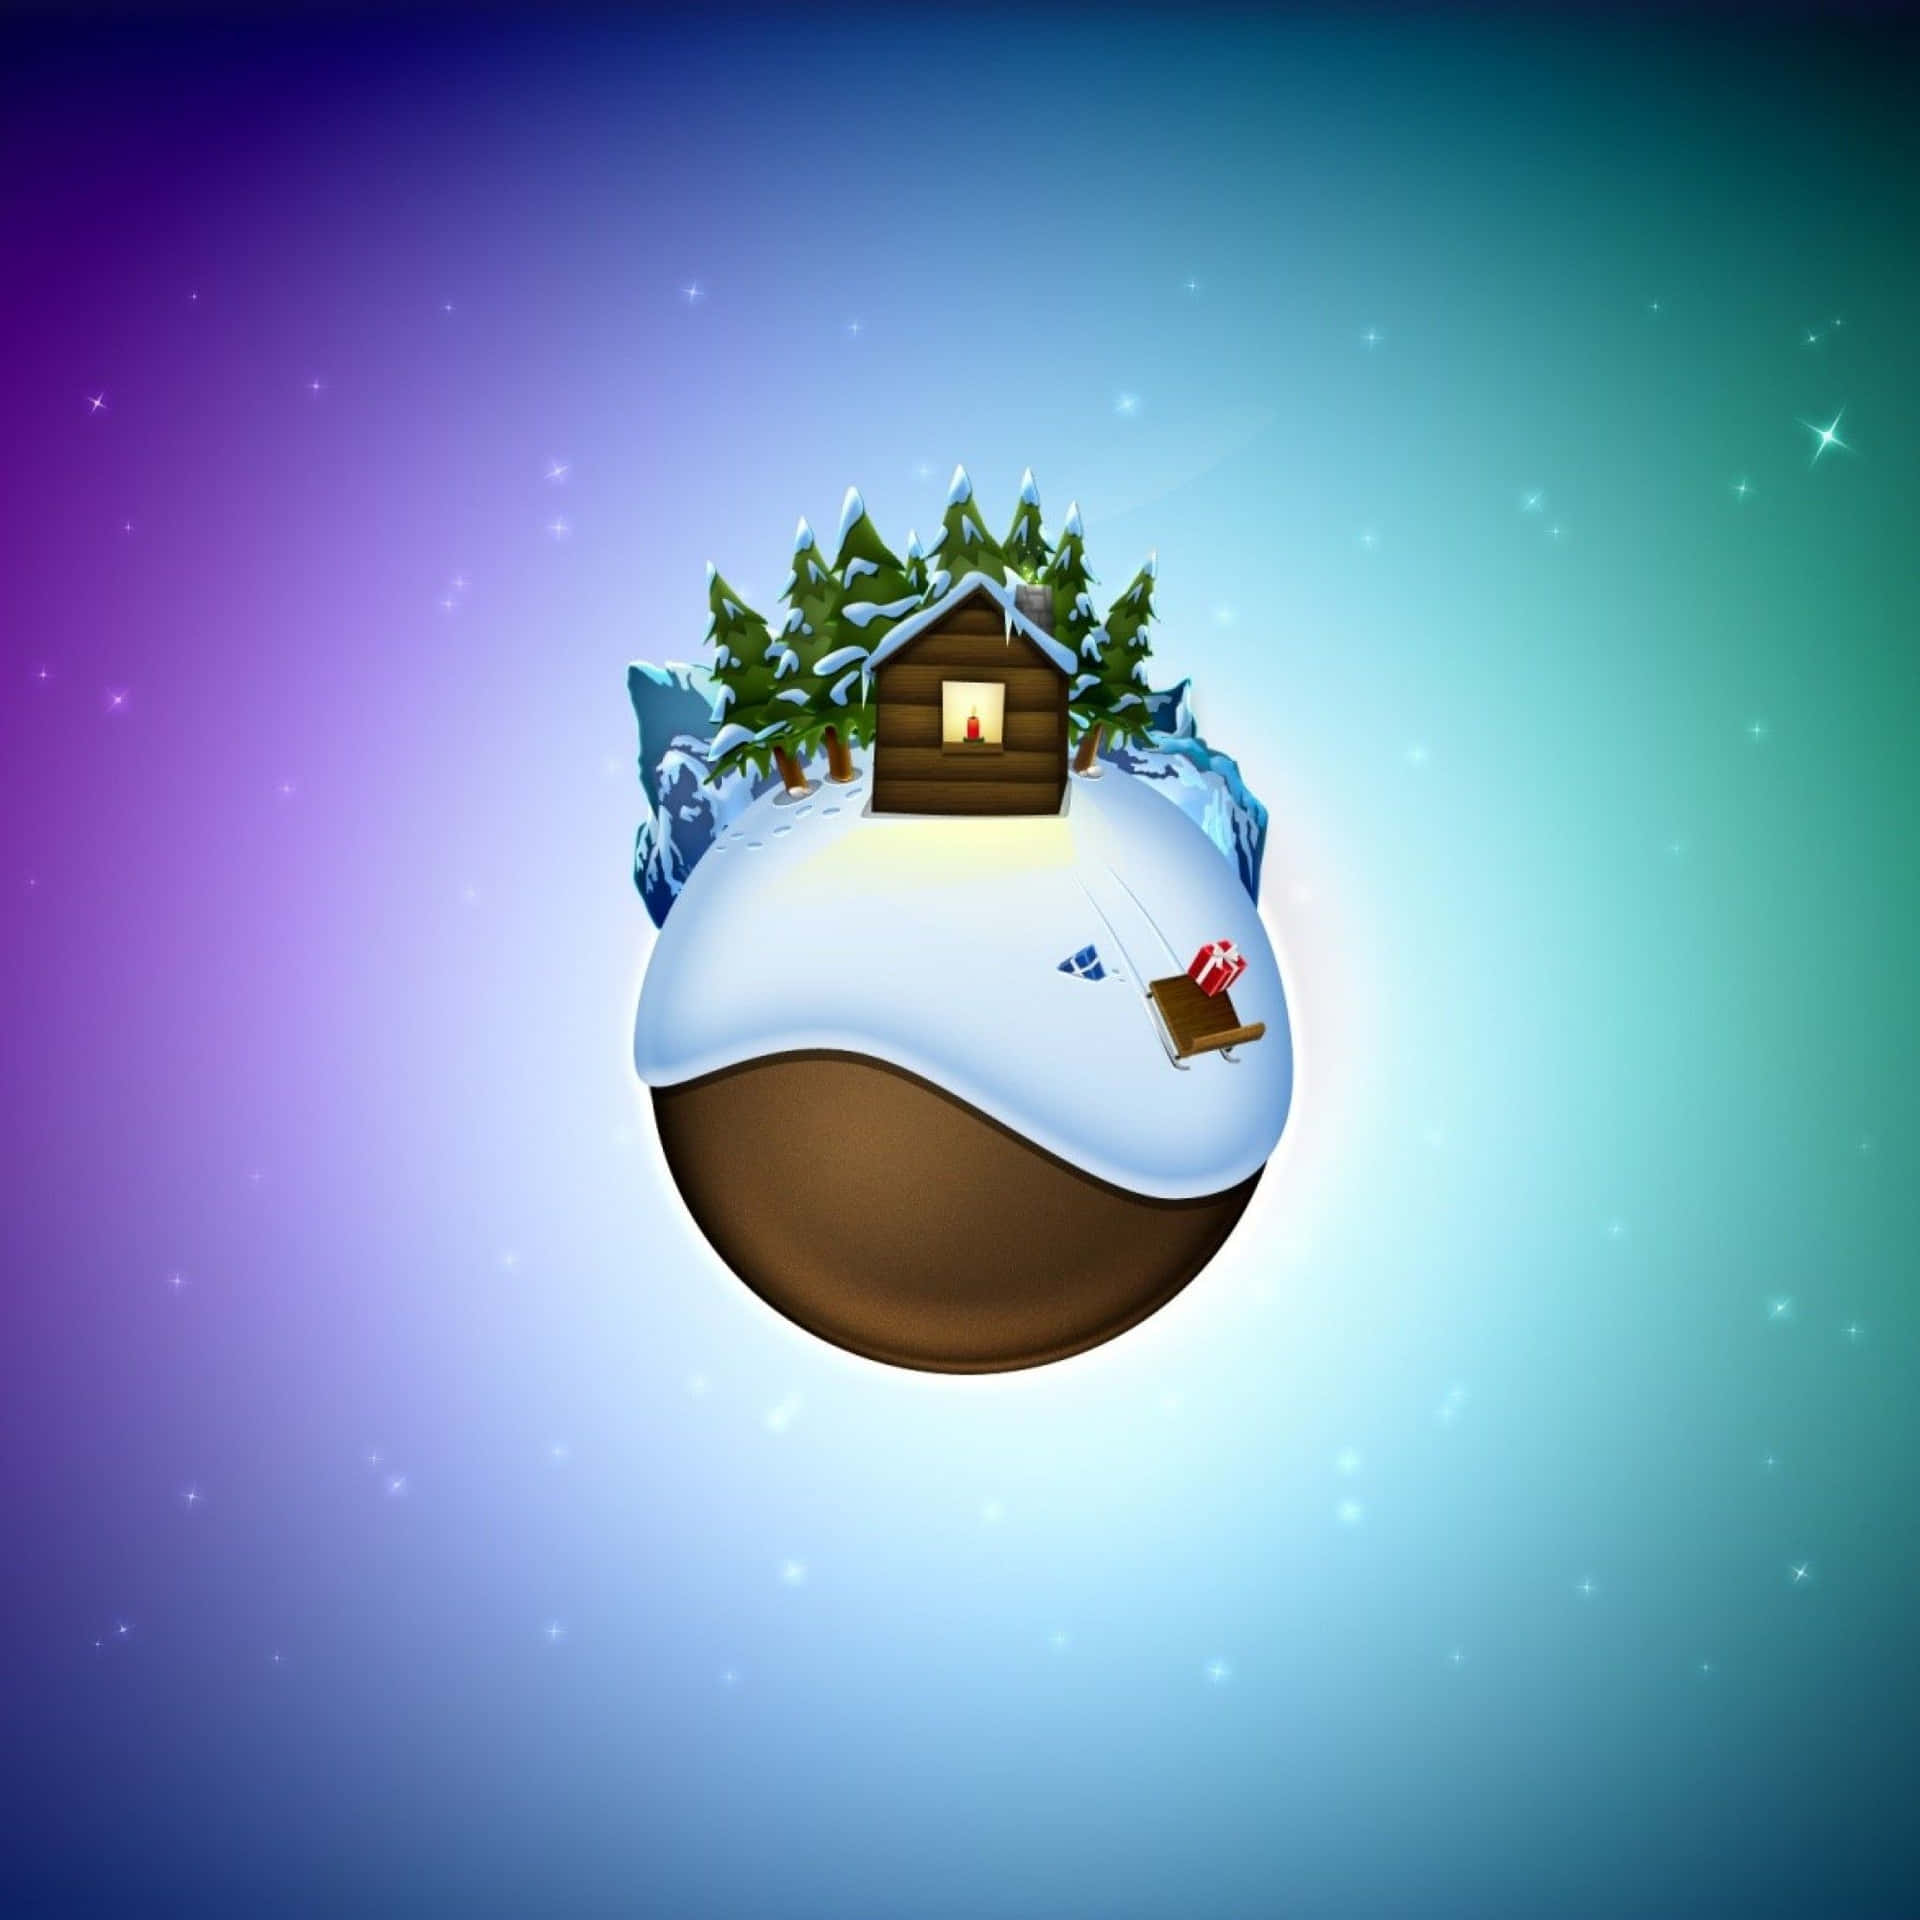 A Christmas Globe With A House On It Wallpaper